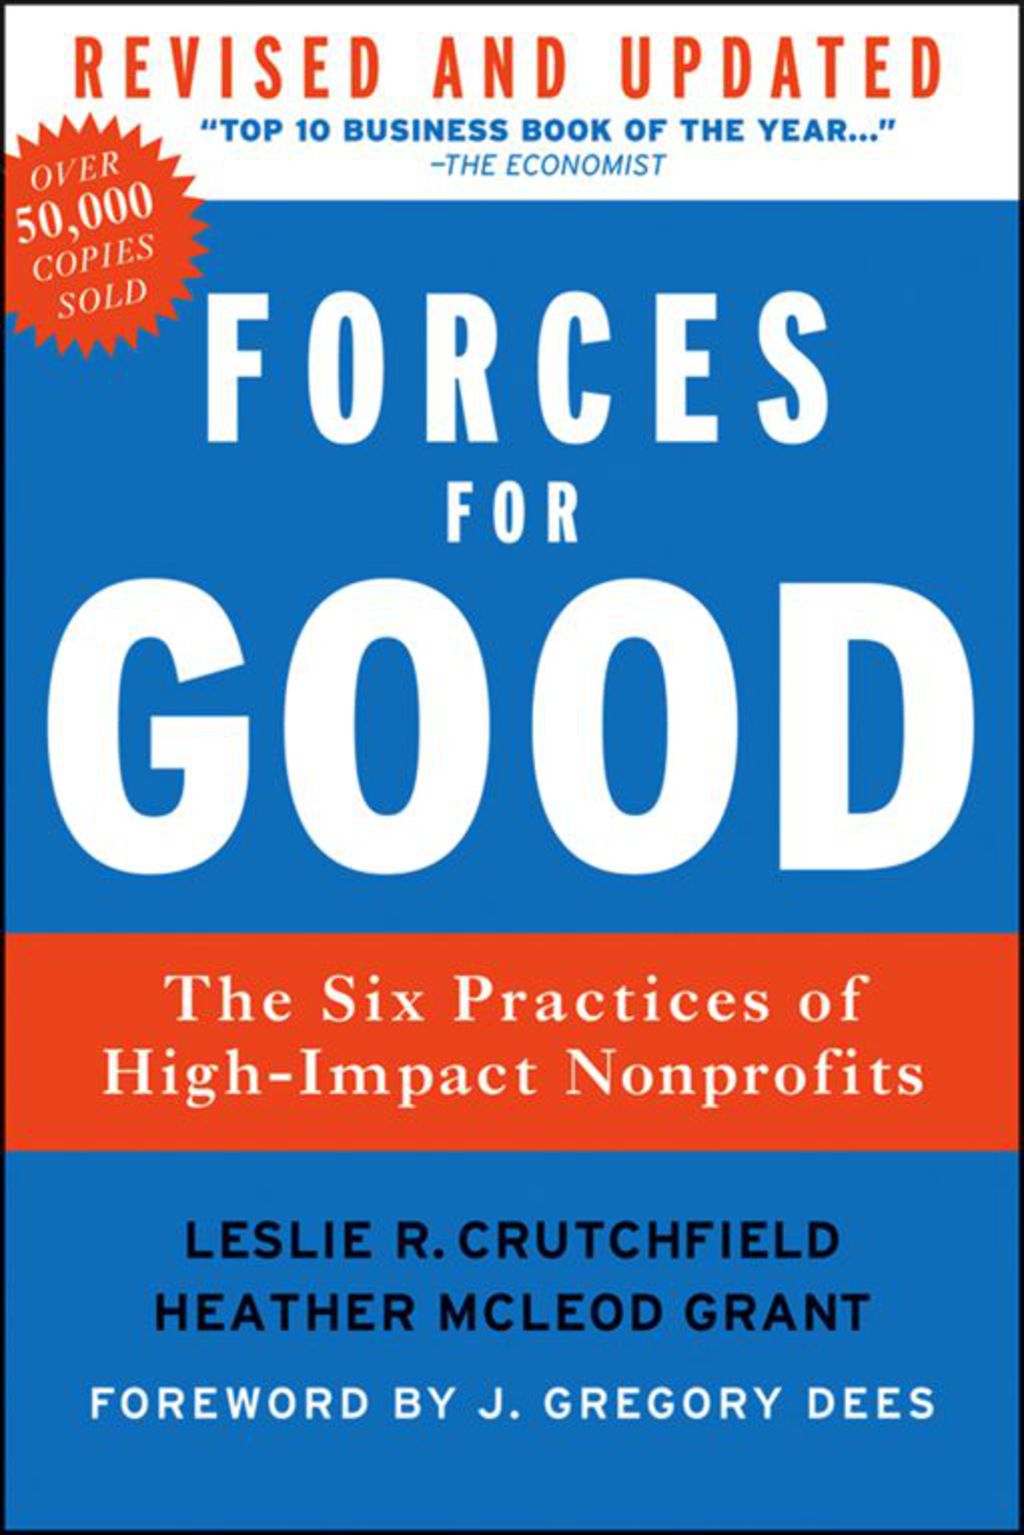 Forces for Good: The Six Practices of High-Impact Nonprofits  Revised and Updated - 2nd Edition (eBook)